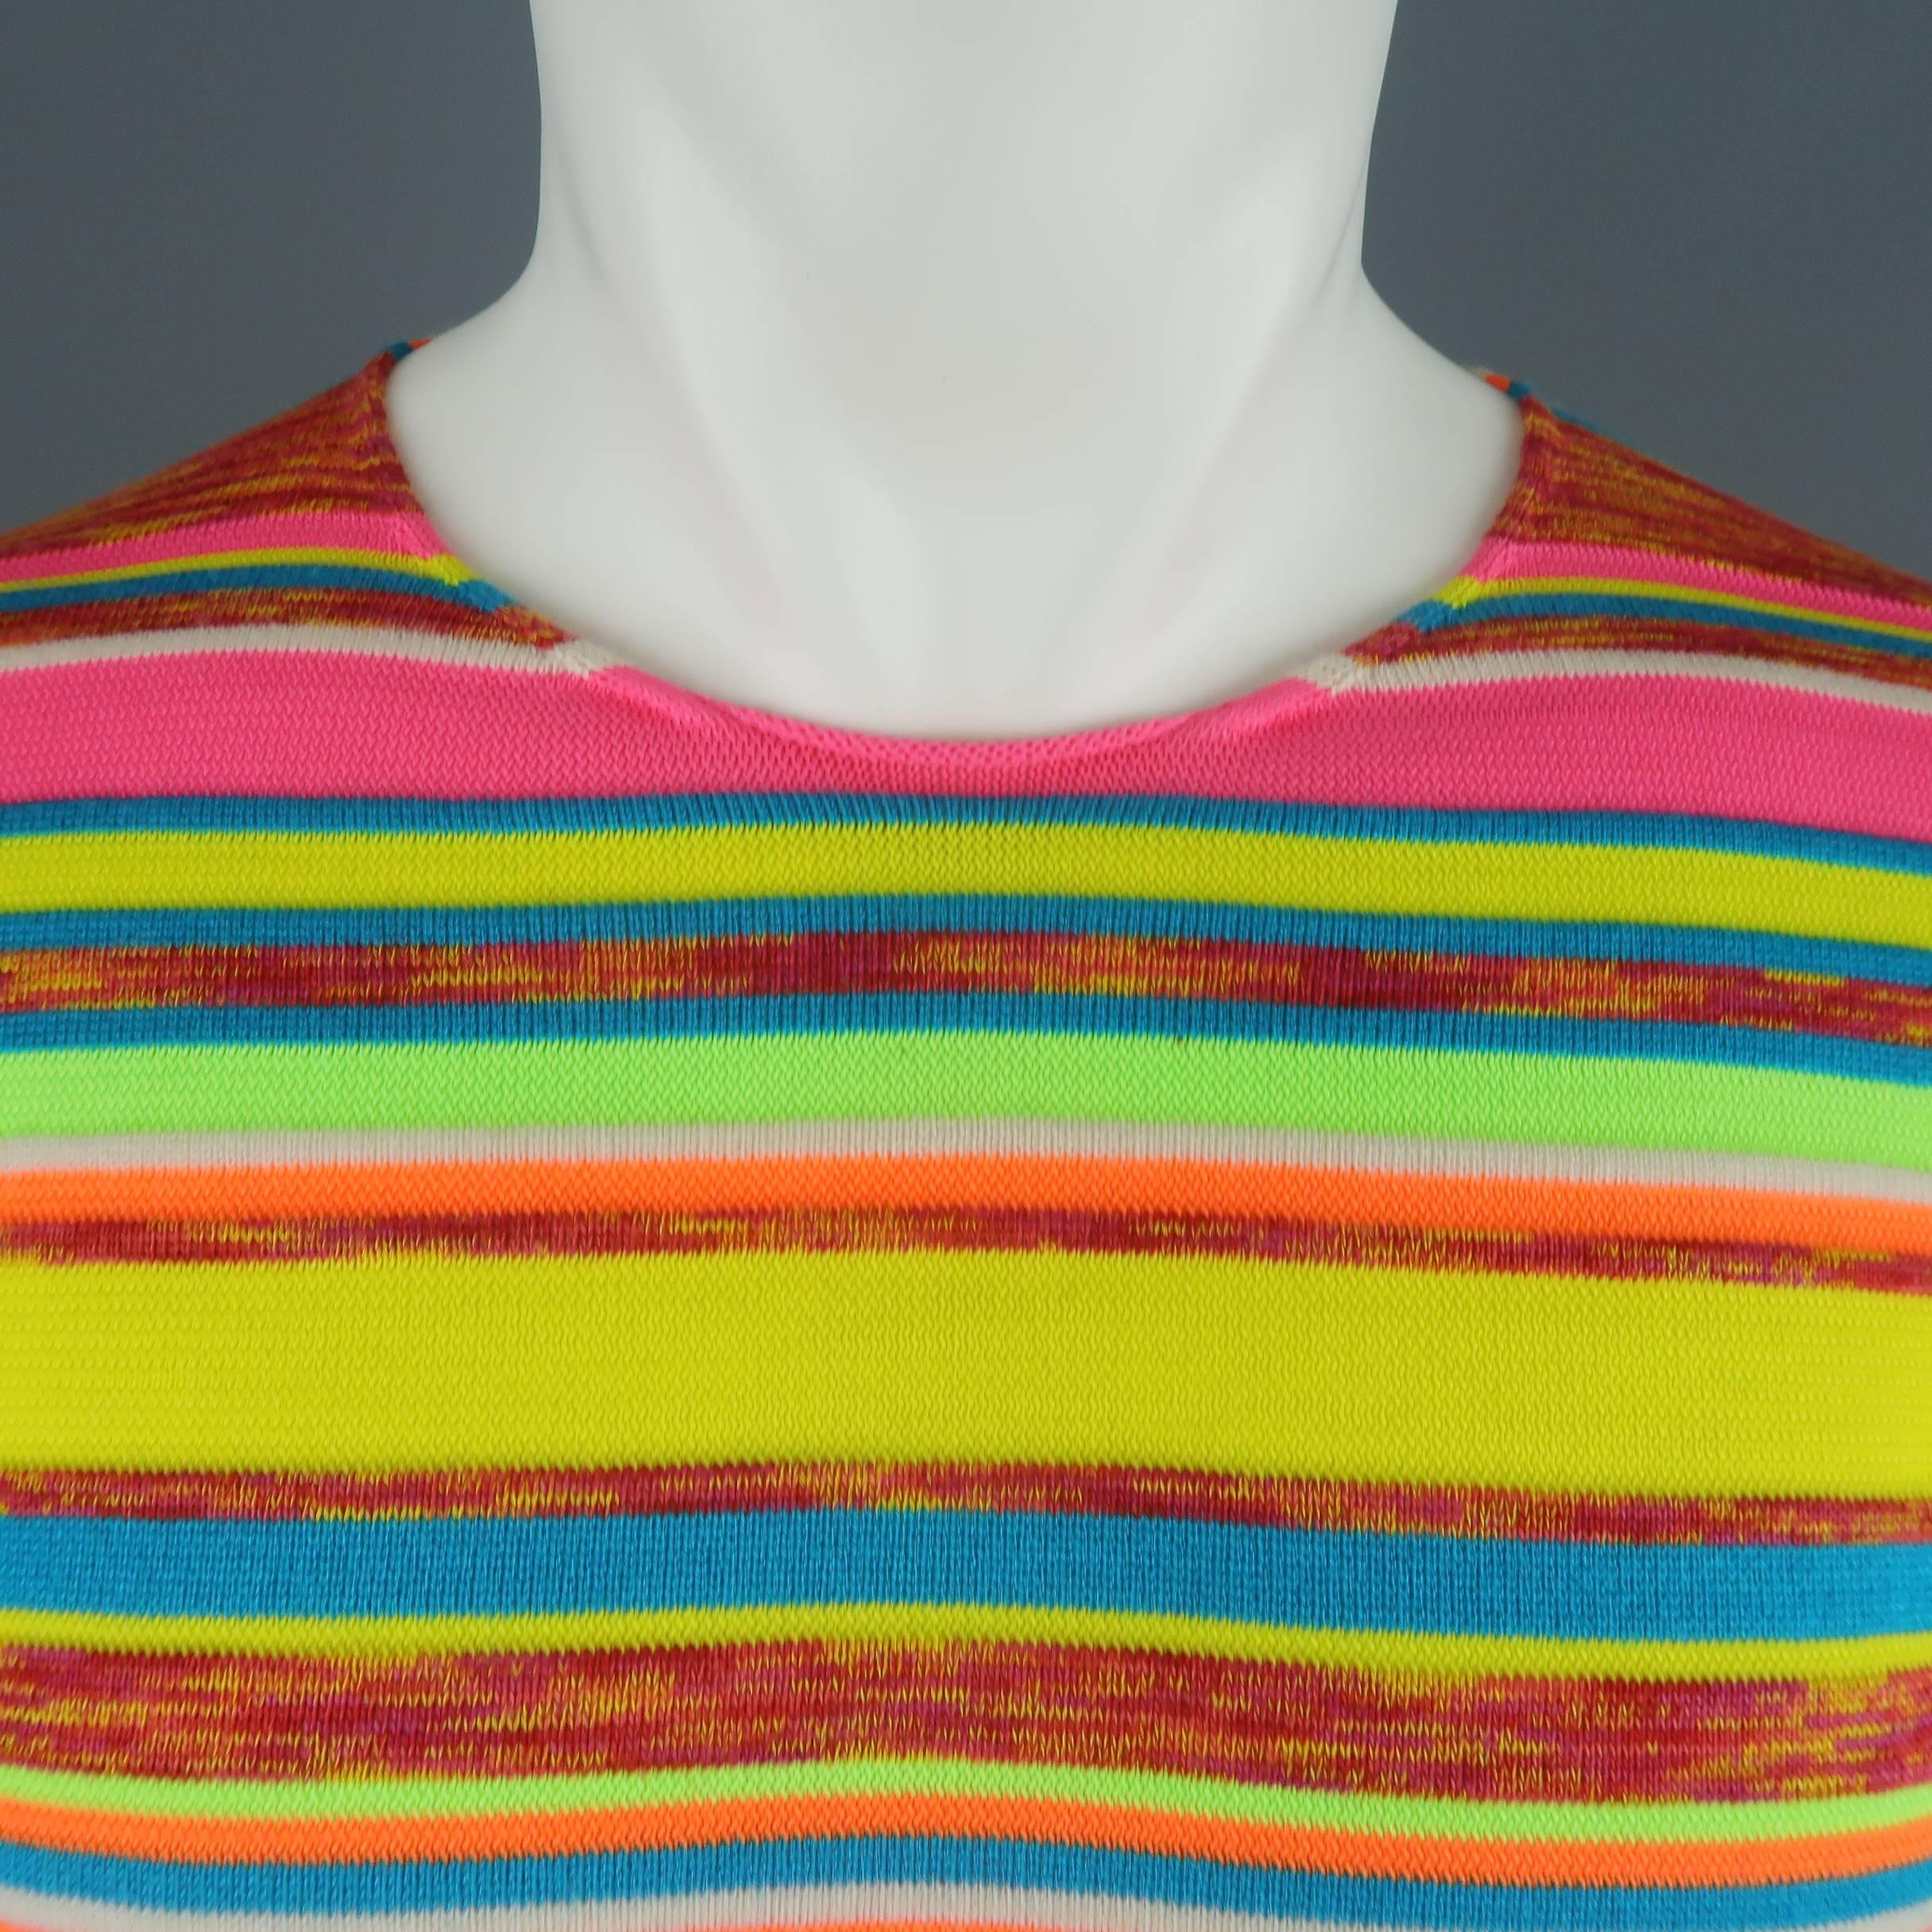 COMME des GARCONS SHIRT pullover sweater comes in neon rainbow striped knit with a crewneck, and rolled hem. Made in Japan.
 
Excellent Pre-Owned Condition.
Marked: M
 
Measurements:
 
Shoulder: 17 in.
Chest: 40 in.
Sleeve: 23 in.
Length: 24 in.